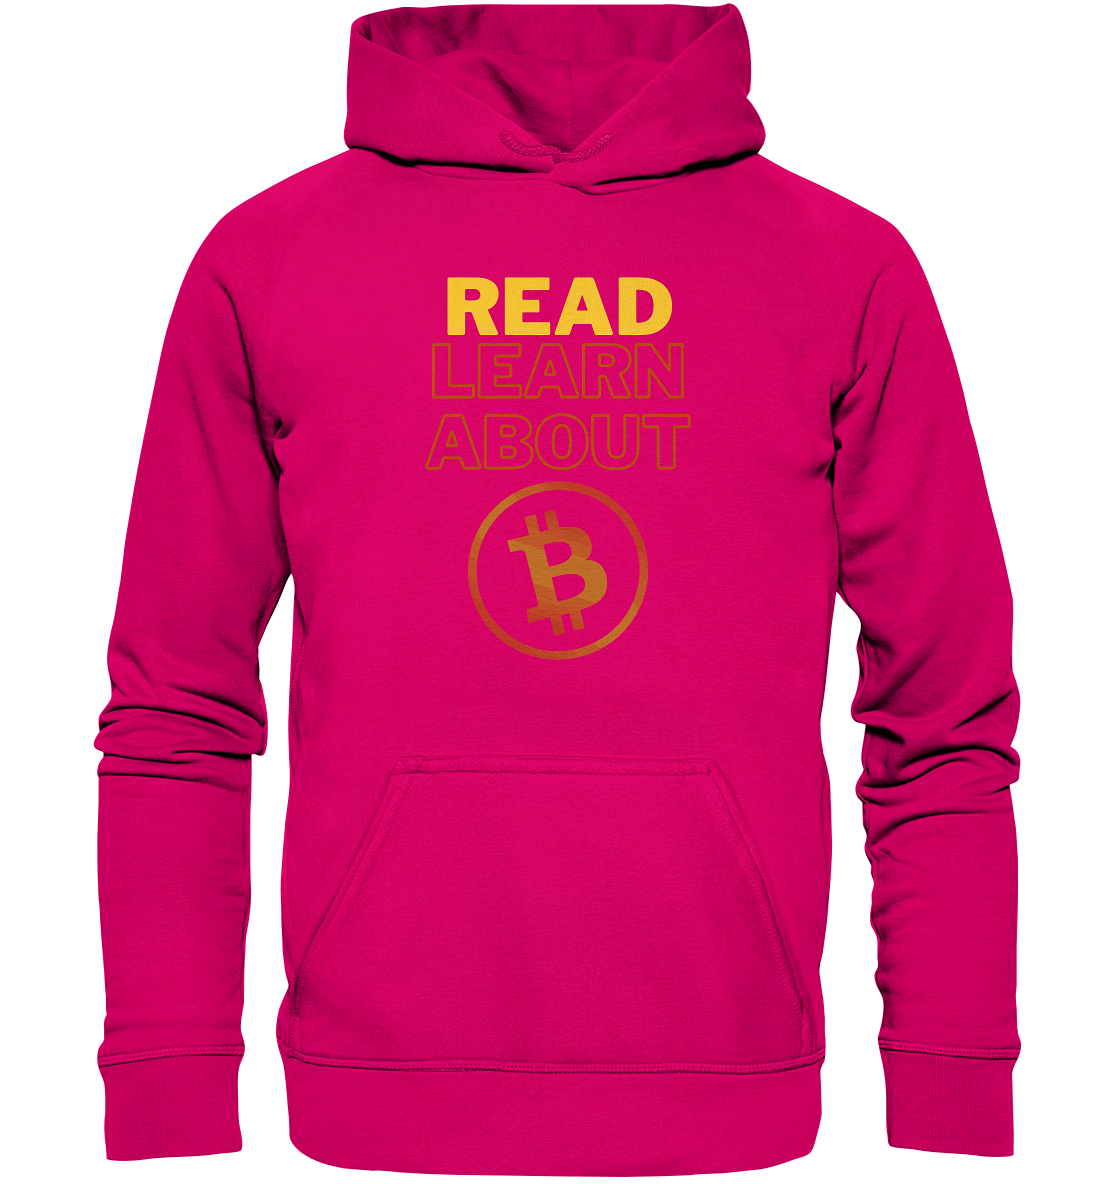 READ - LEARN ABOUT - BTC-Symbol - Basic Unisex Hoodie